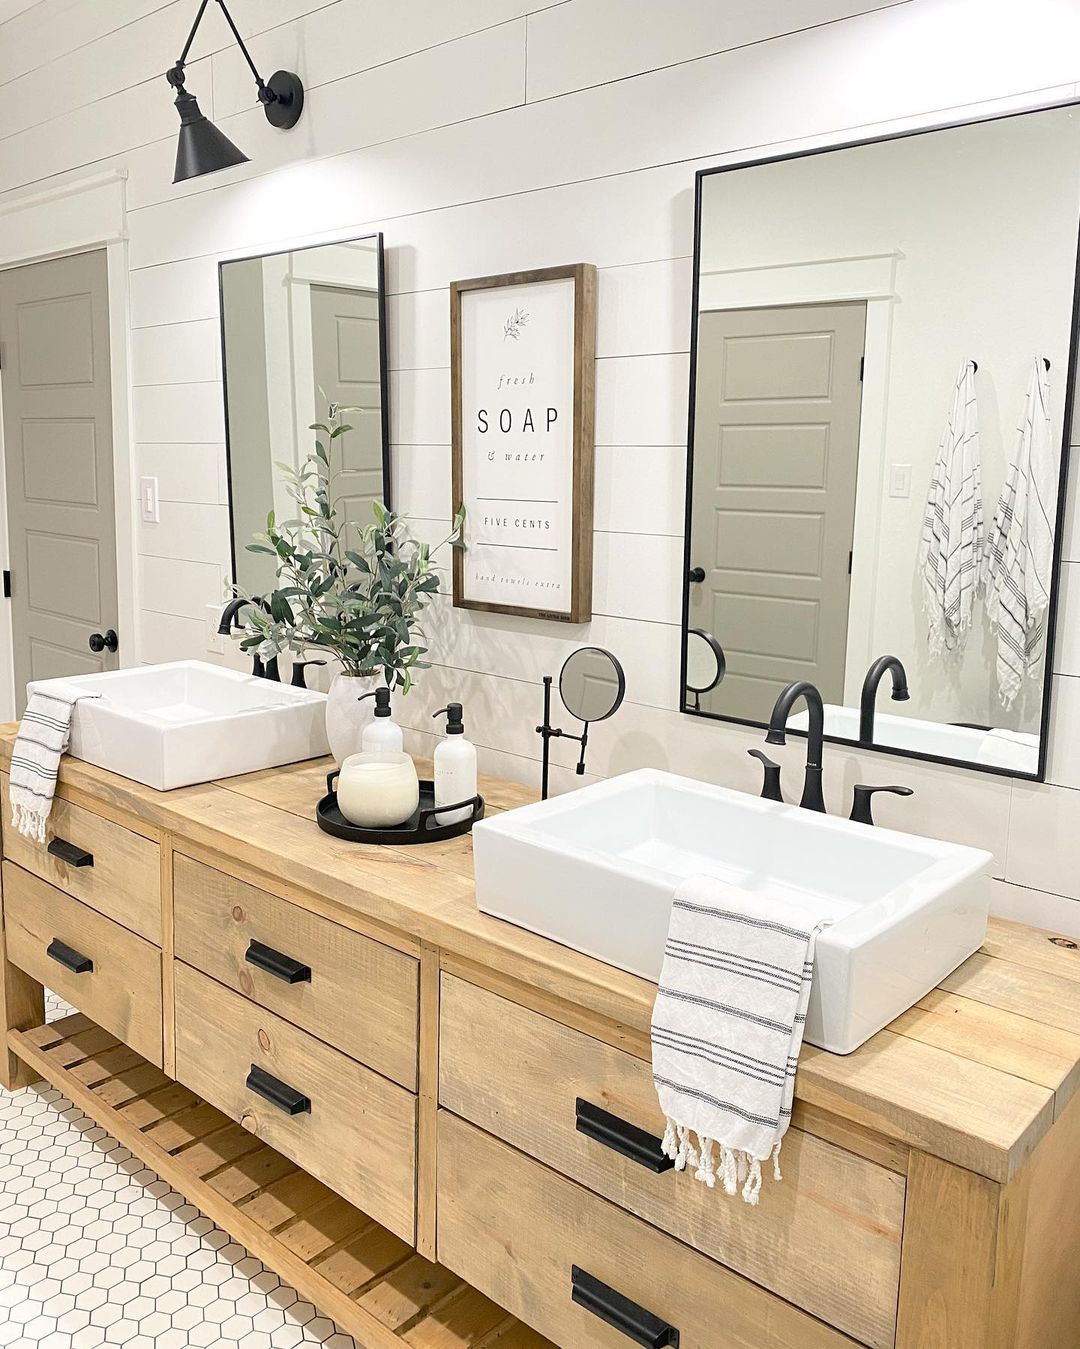 Double bathroom sink with clear counters except a few necessities. Photo by Instagram user @thecozyfarmhouse.